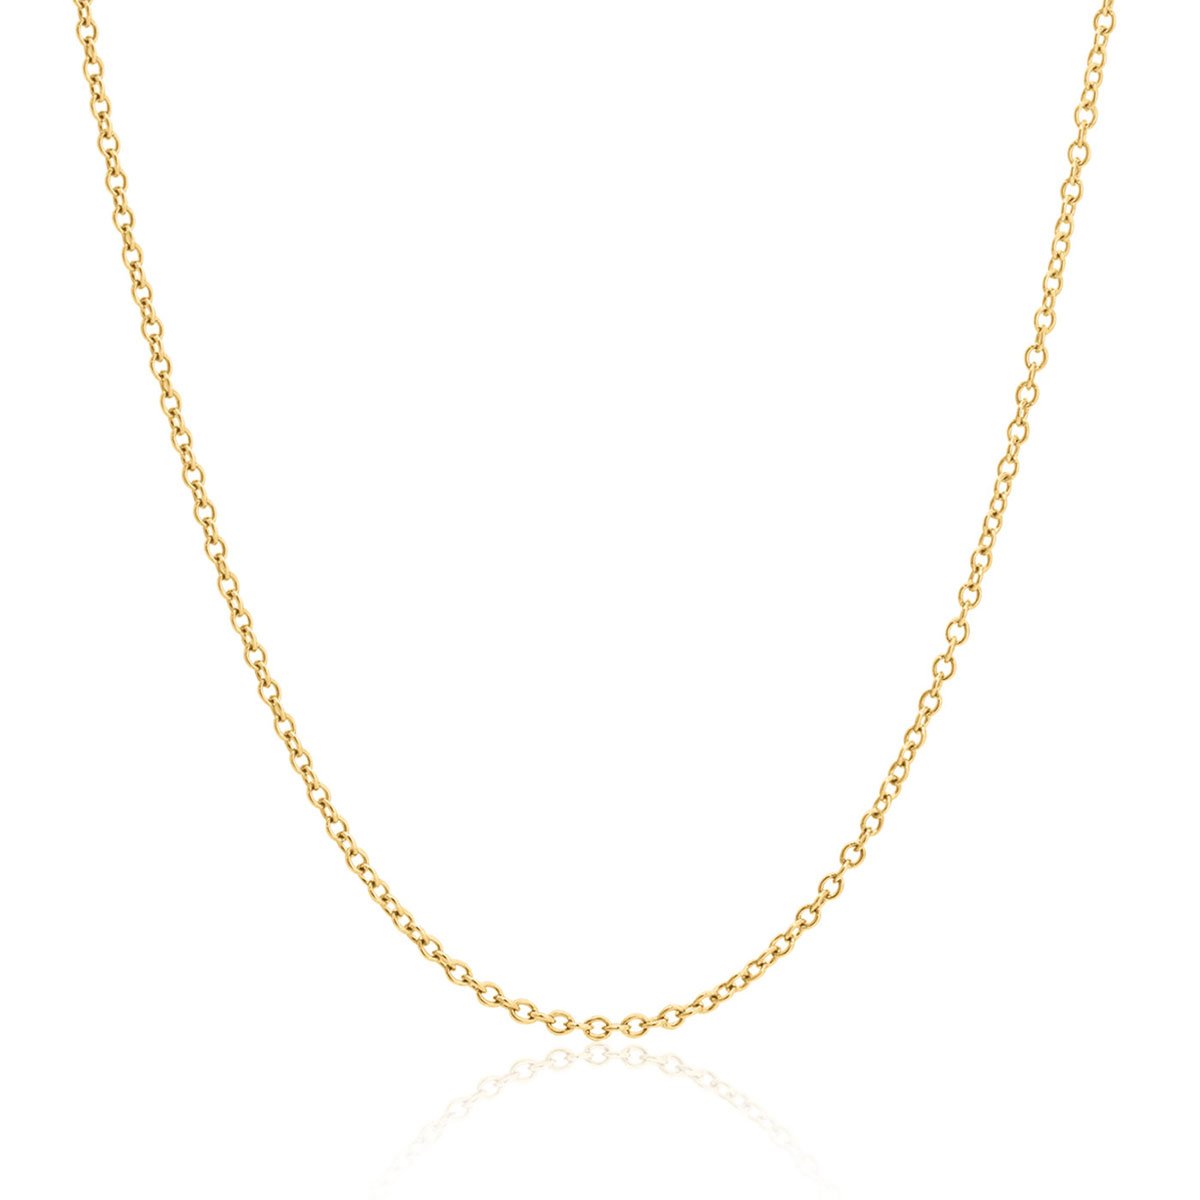 9ct Yellow Gold 1.3mm Trace Link Adjustable Chain